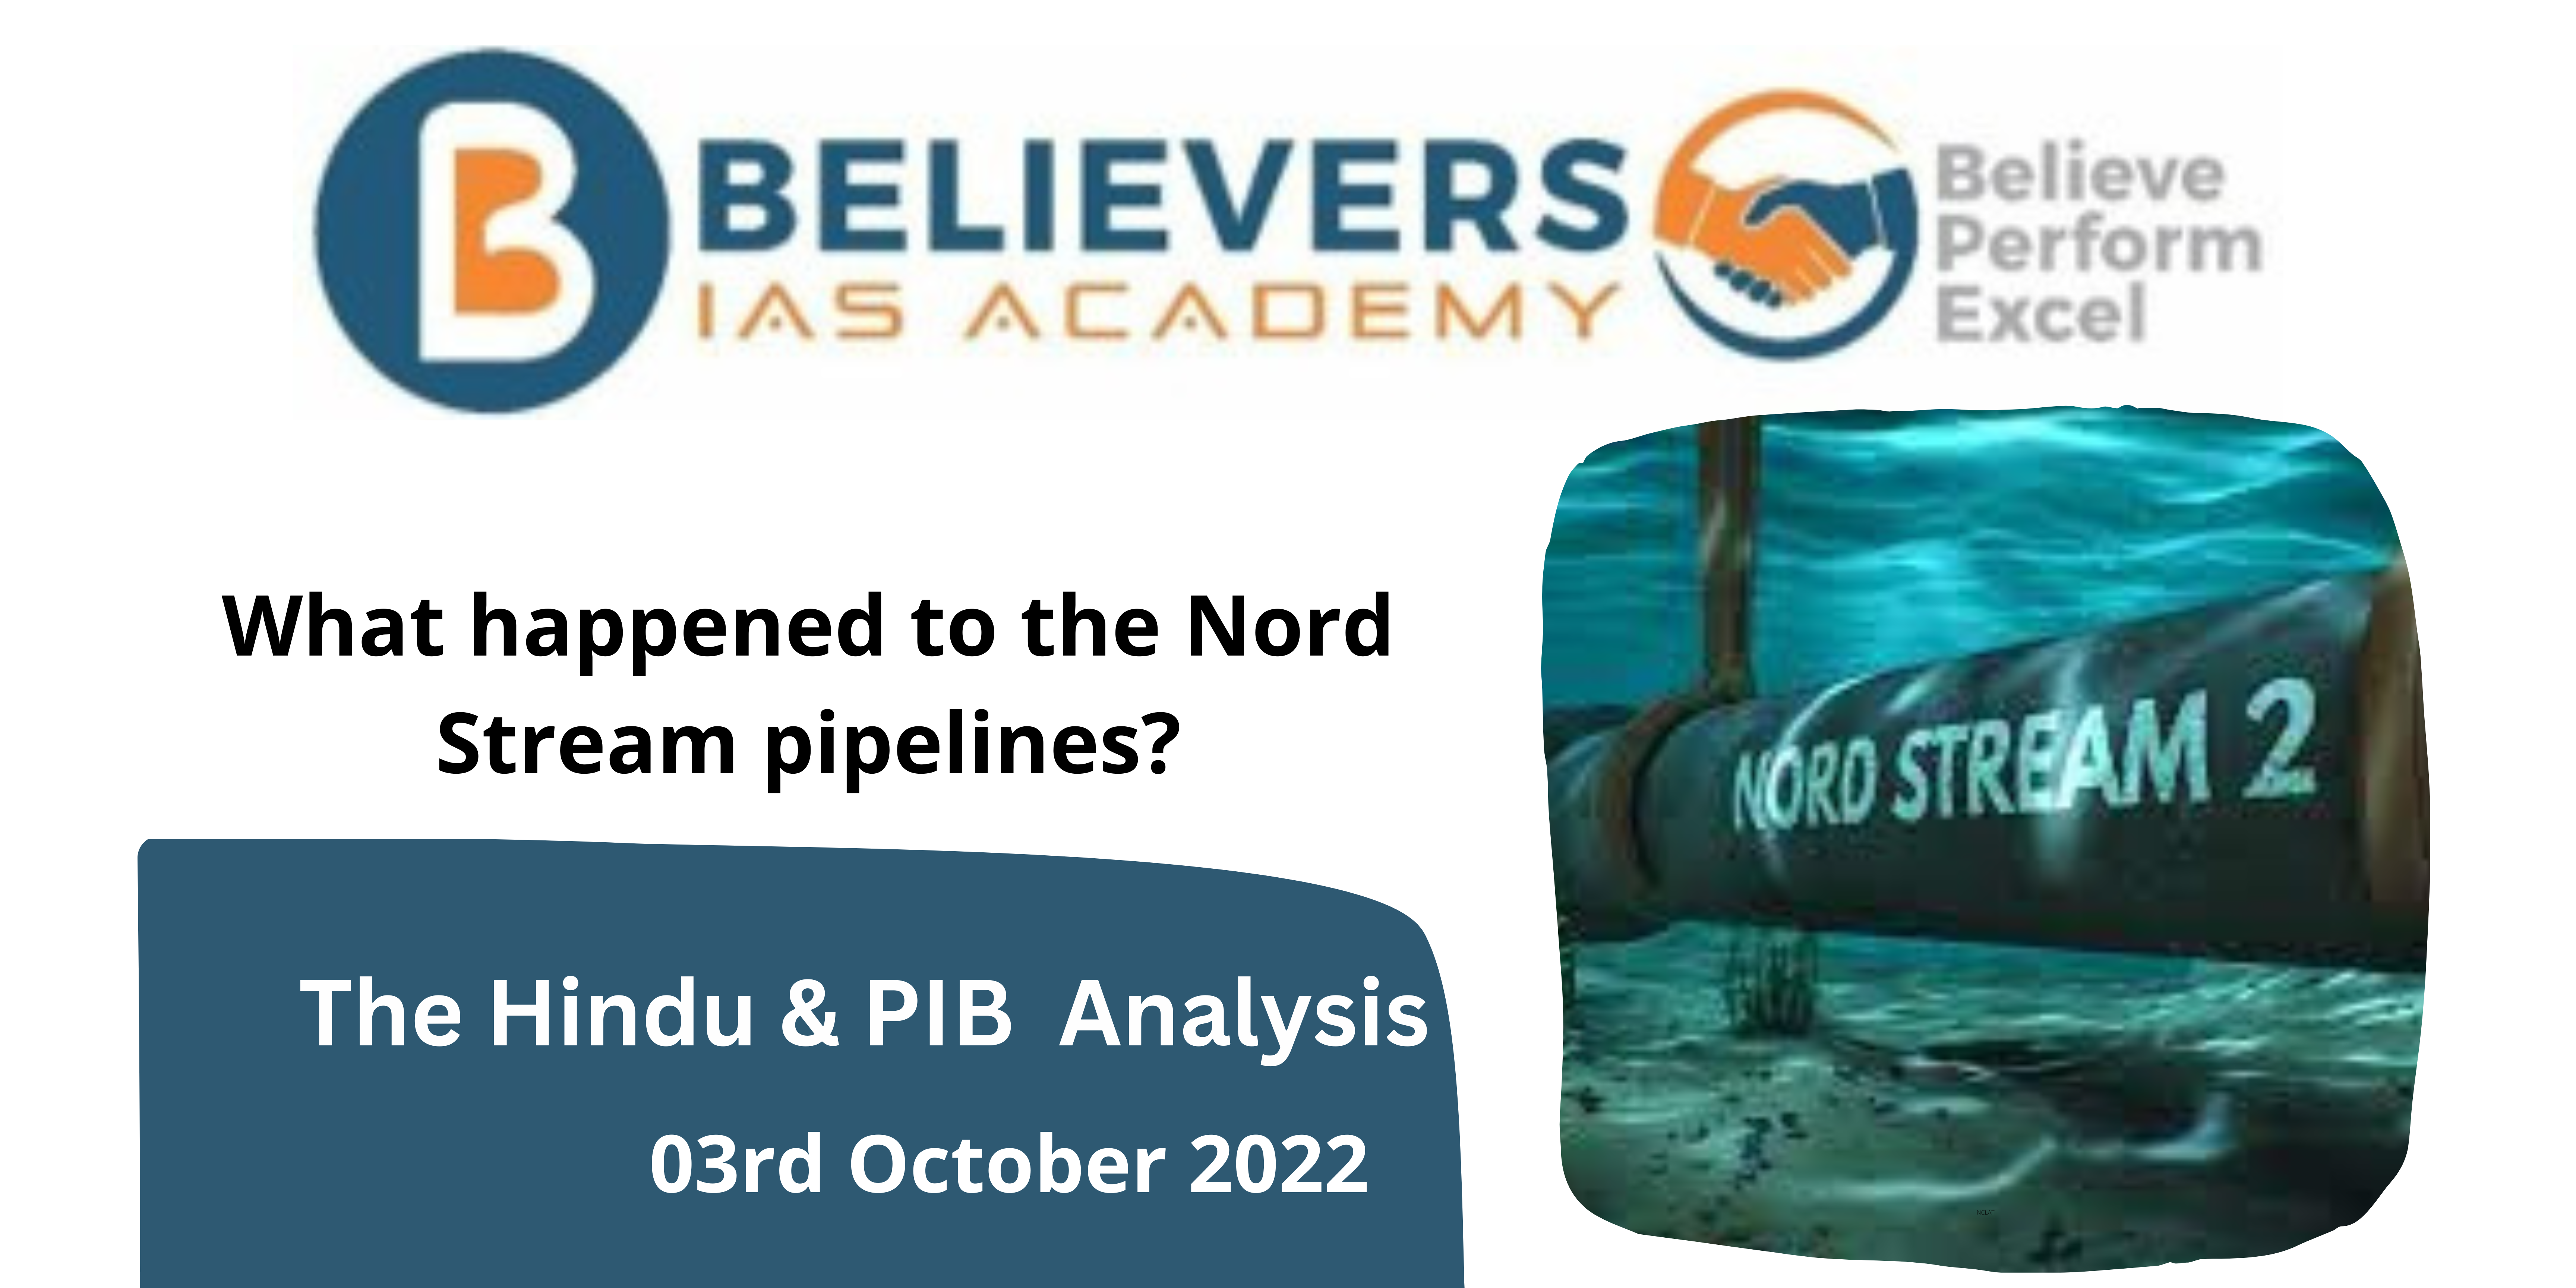 What happened to the Nord Stream pipelines?